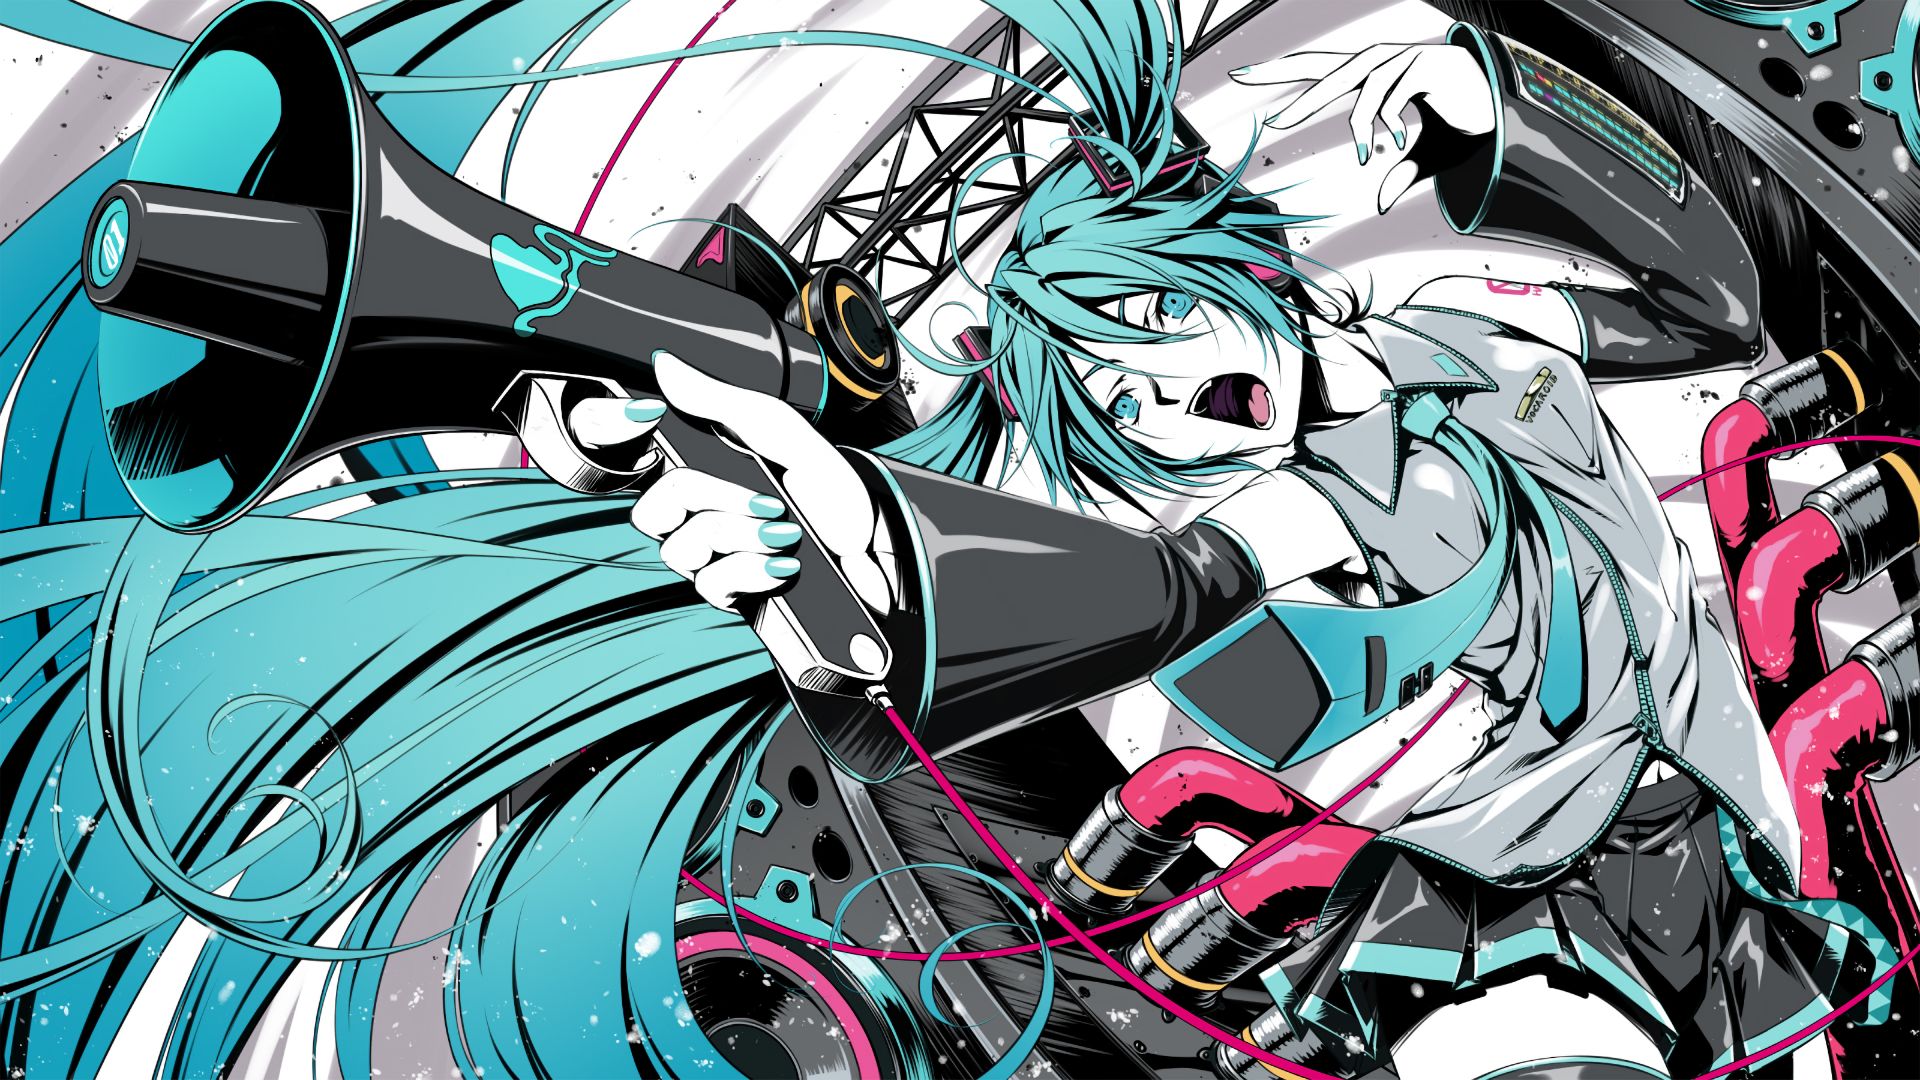 Download mobile wallpaper Anime, Vocaloid, Hatsune Miku, Love Is War (Vocaloid) for free.